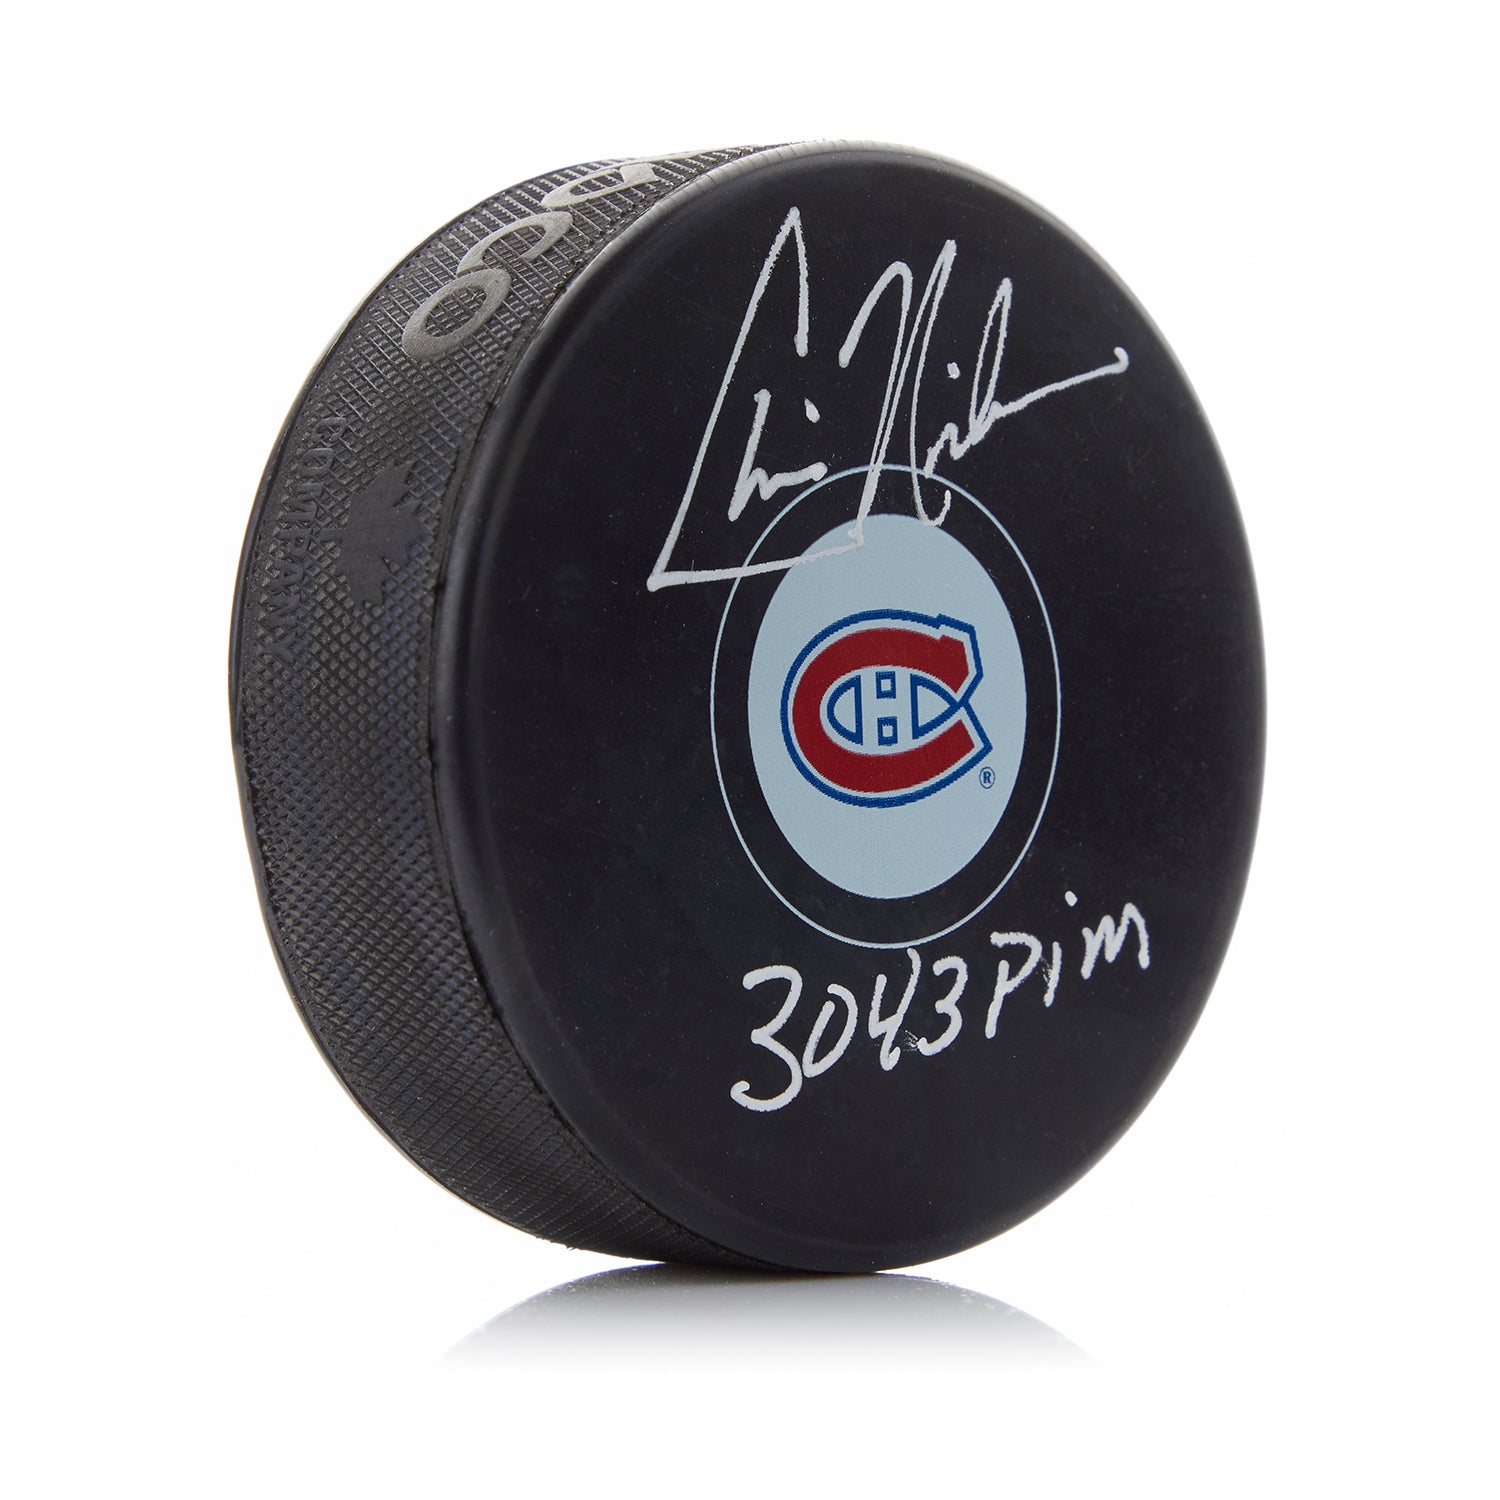 Chris Nilan Signed Montreal Canadiens Puck with PIMs Note